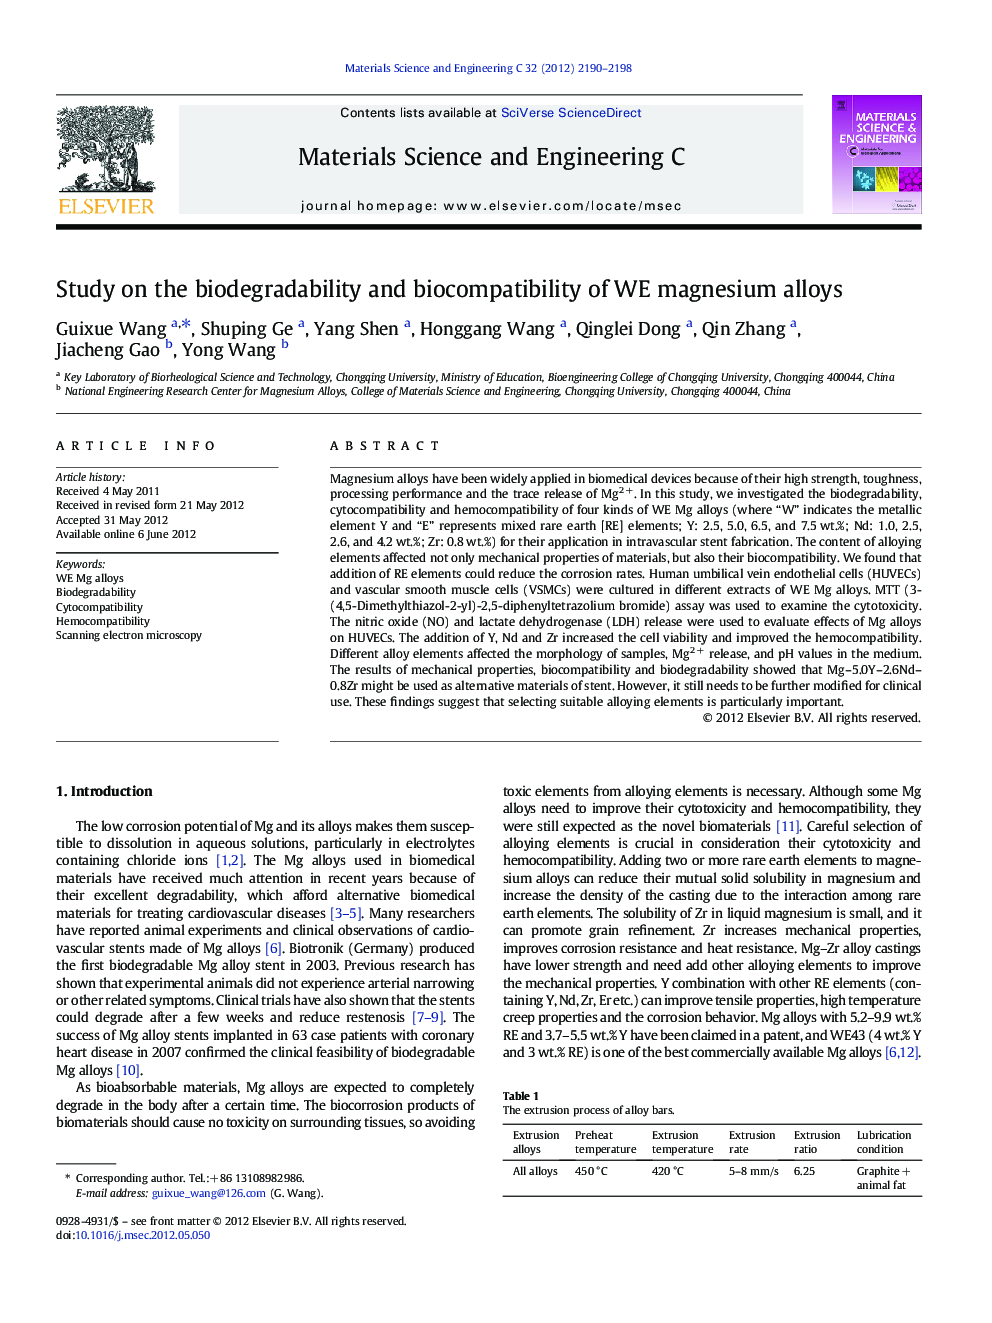 Study on the biodegradability and biocompatibility of WE magnesium alloys